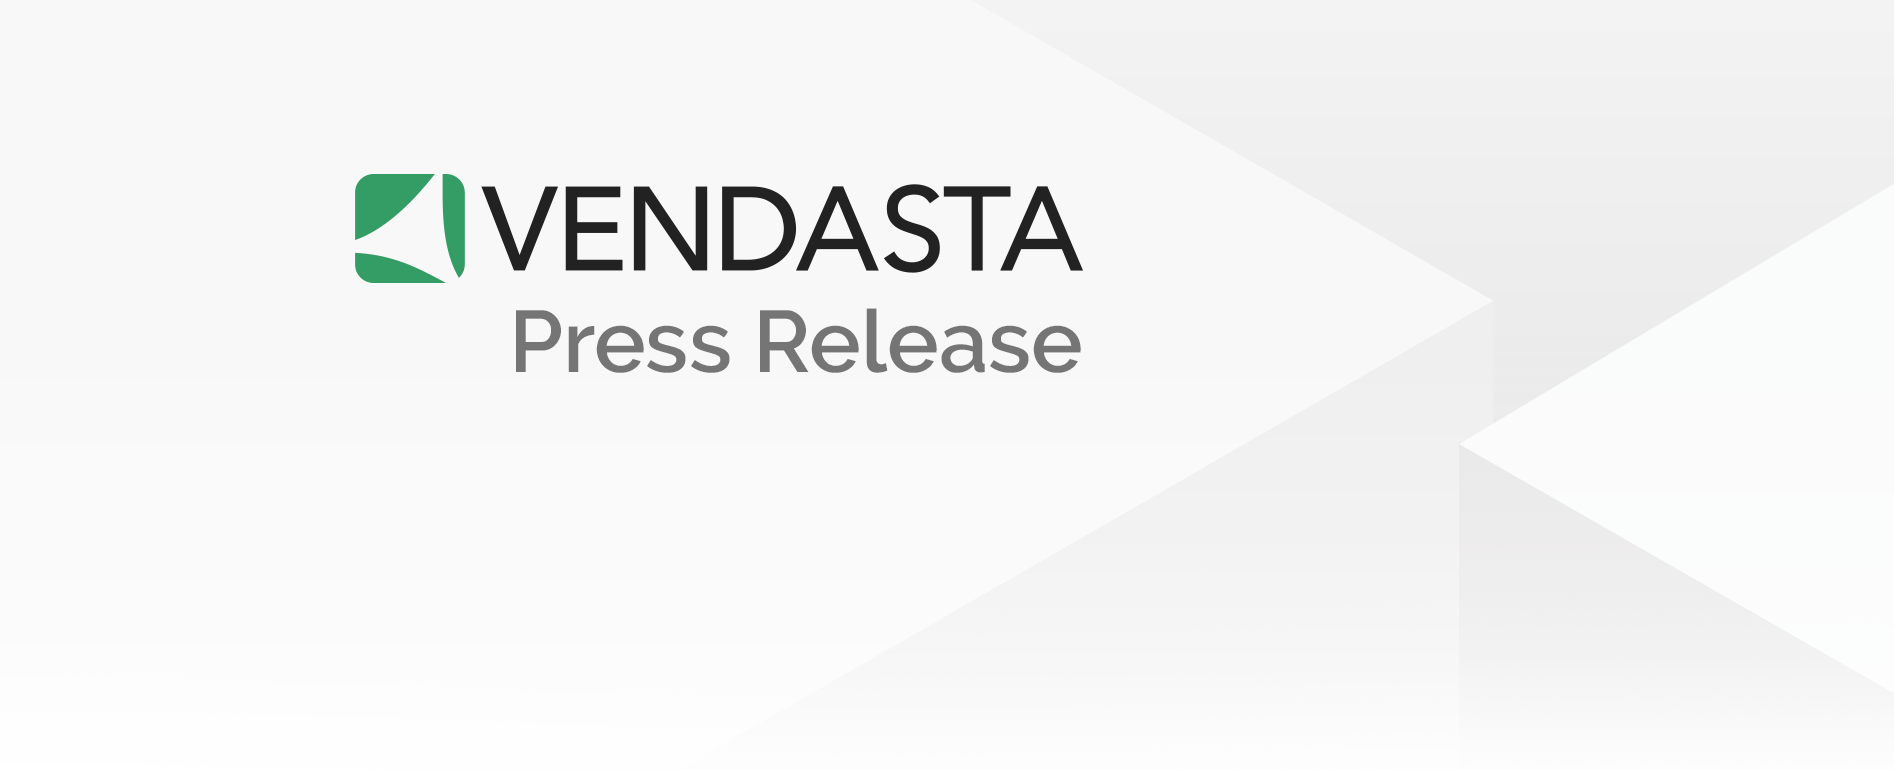 Vendasta Launches New Industry Blog Aimed at Challenges in the Digital Agency Space